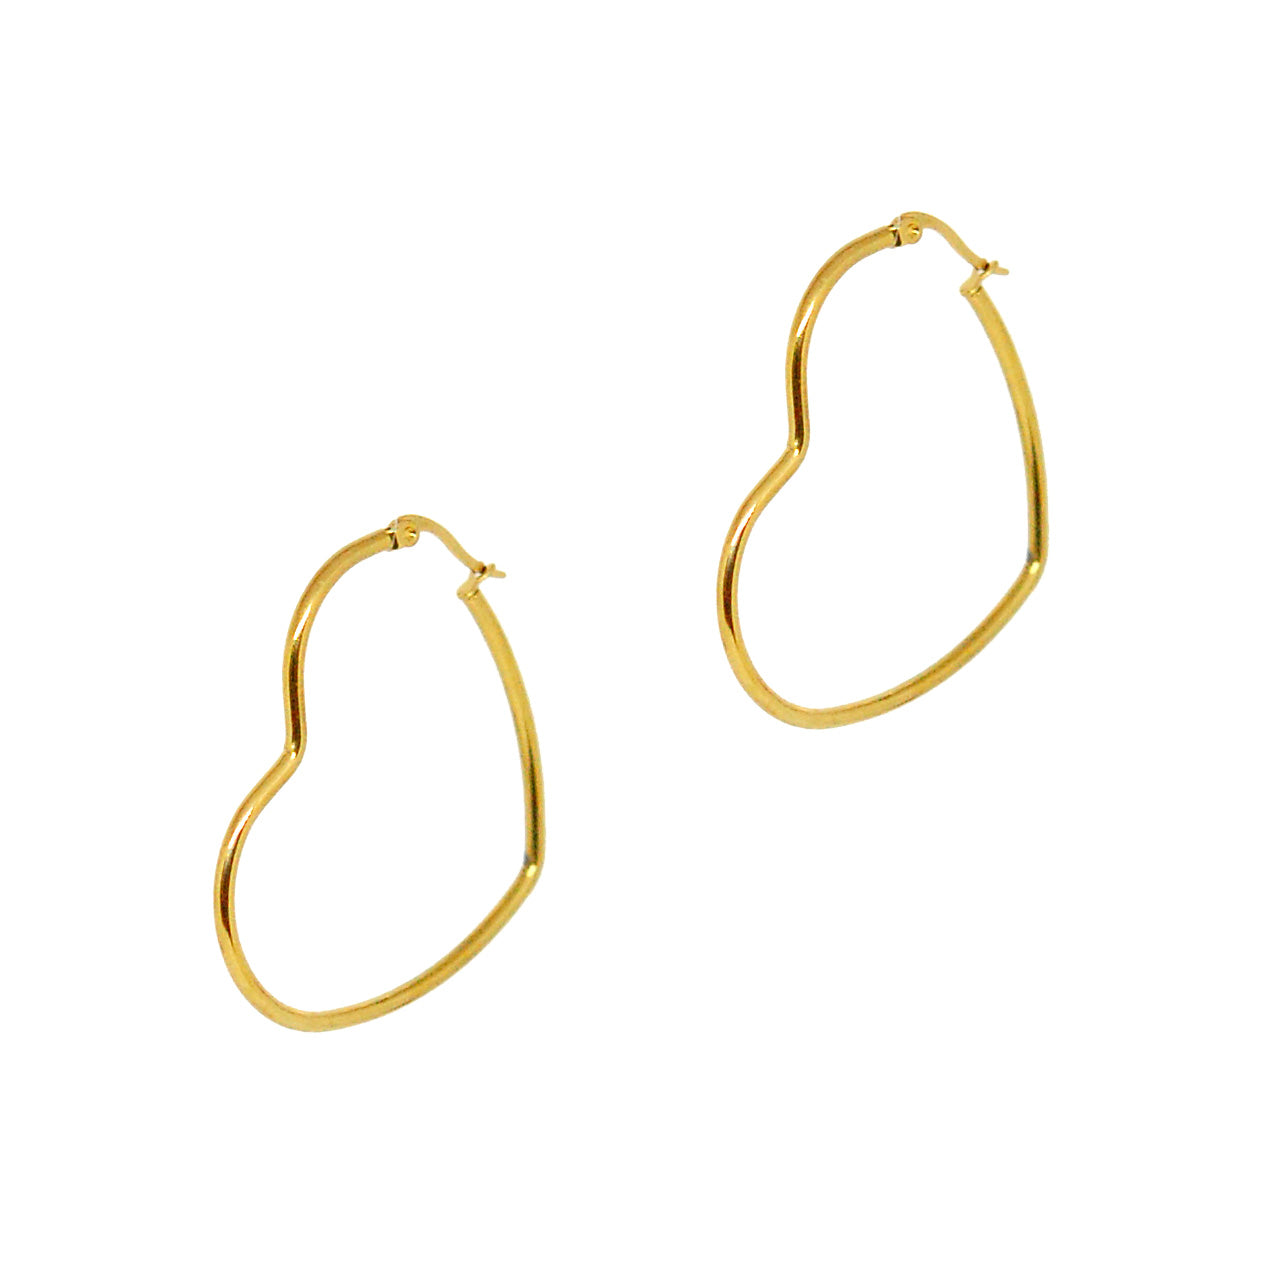 ESE 7376: Gold Plated Rounded Heart Outline Studs (43mm)